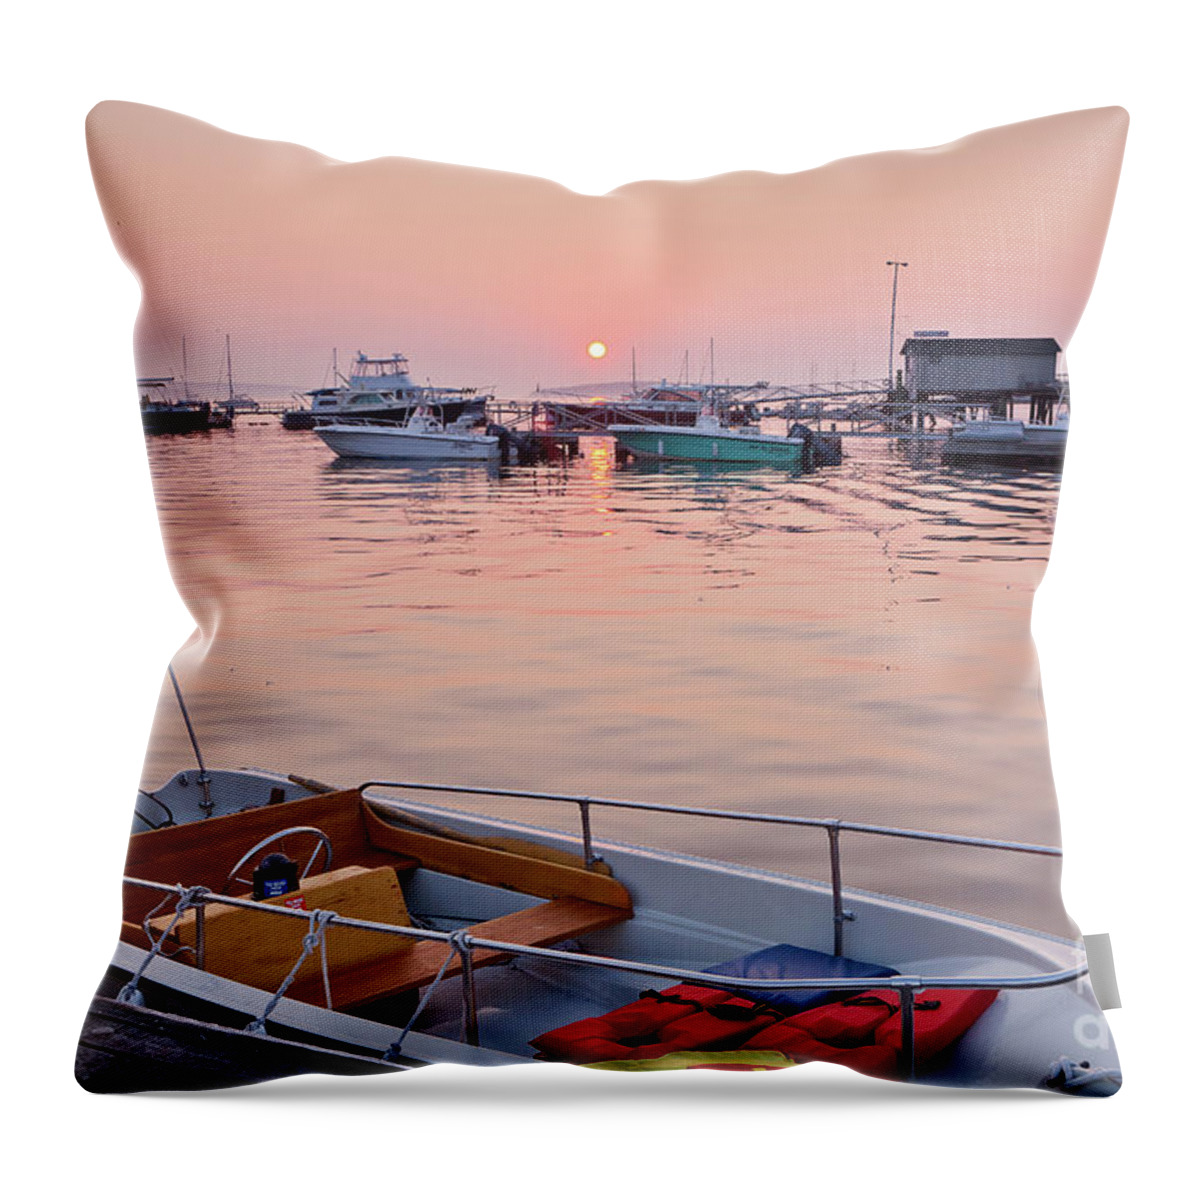 Boat Throw Pillow featuring the photograph Southwest Harbor Sunrise #1 by Susan Cole Kelly